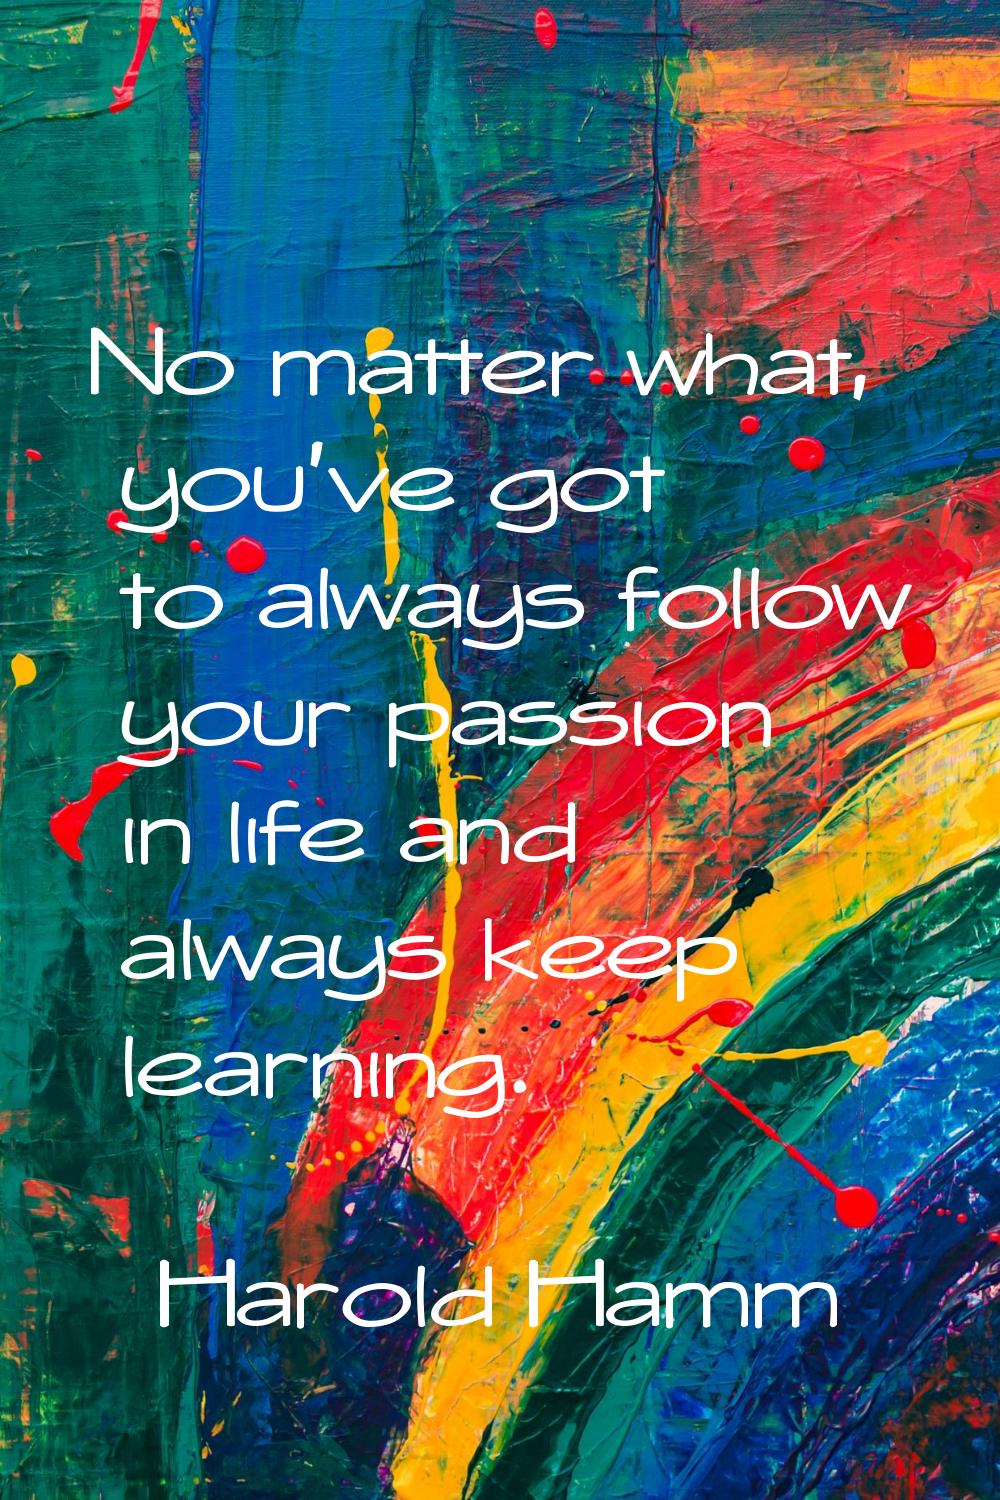 No matter what, you've got to always follow your passion in life and always keep learning.